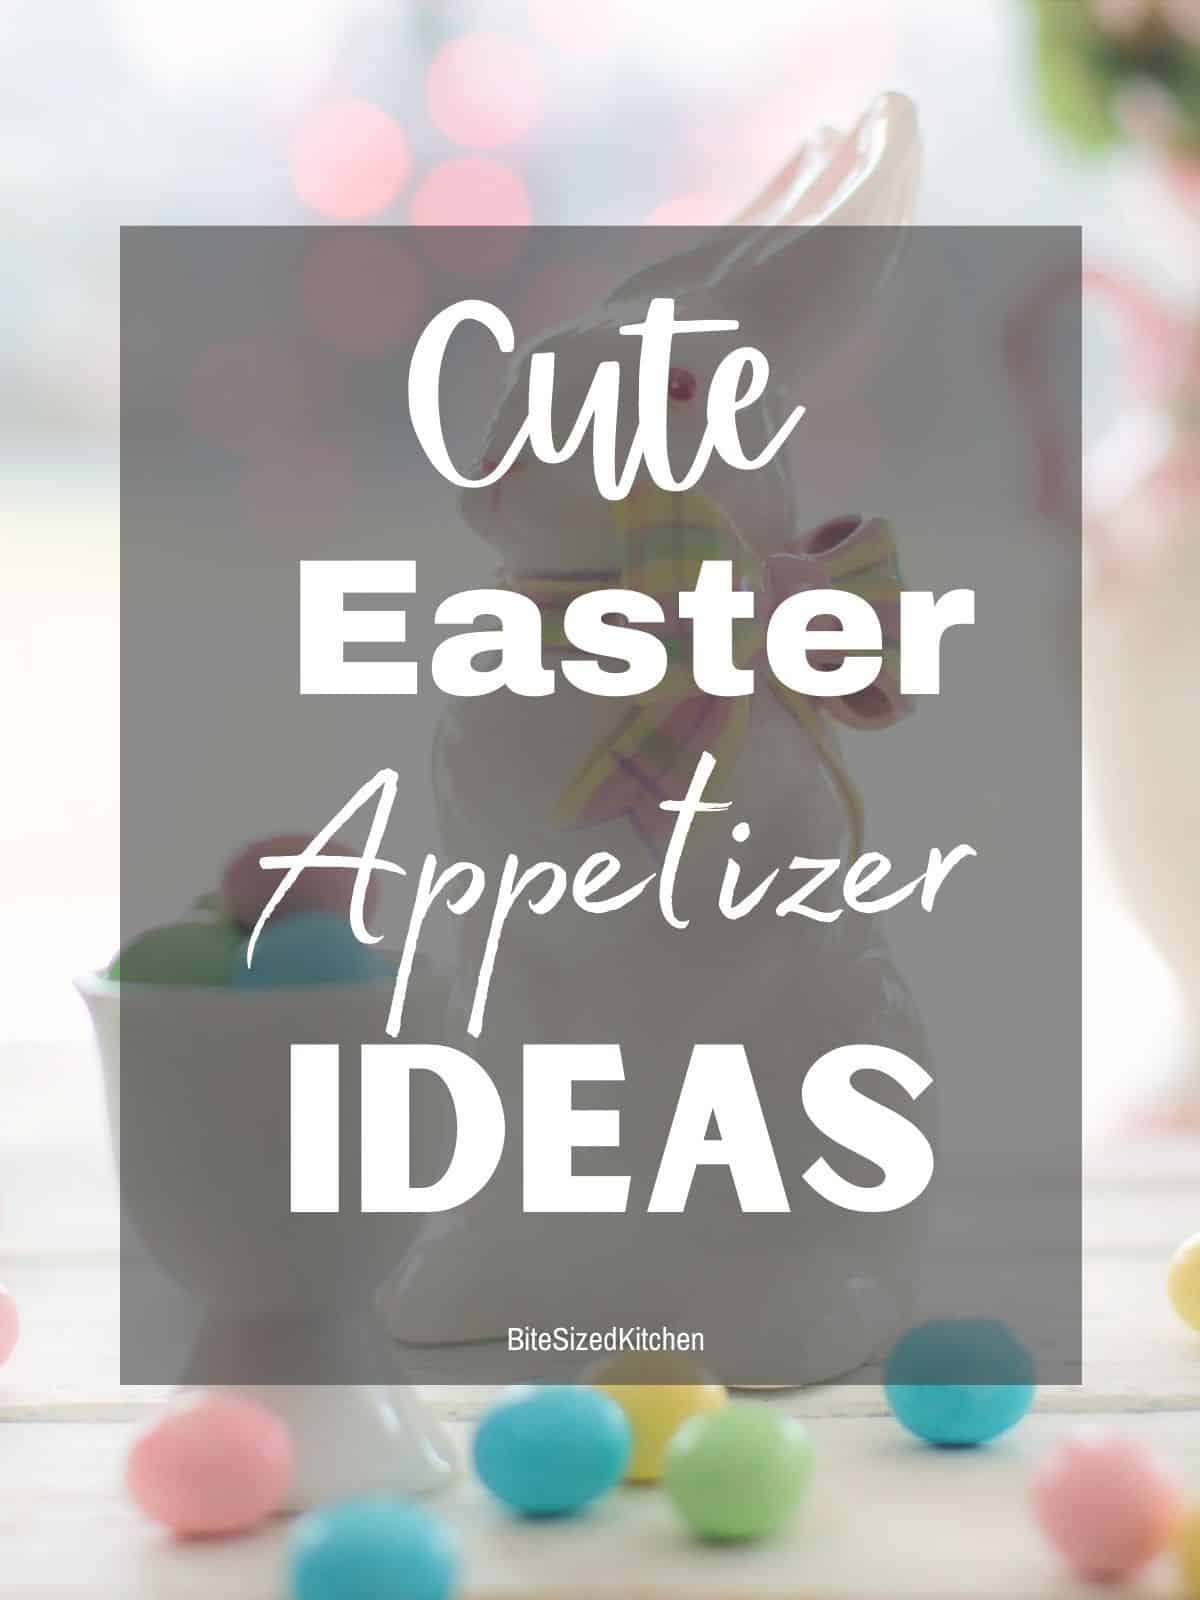 easter bunny wtih text overlay saying "cute easter appetizer ideas".